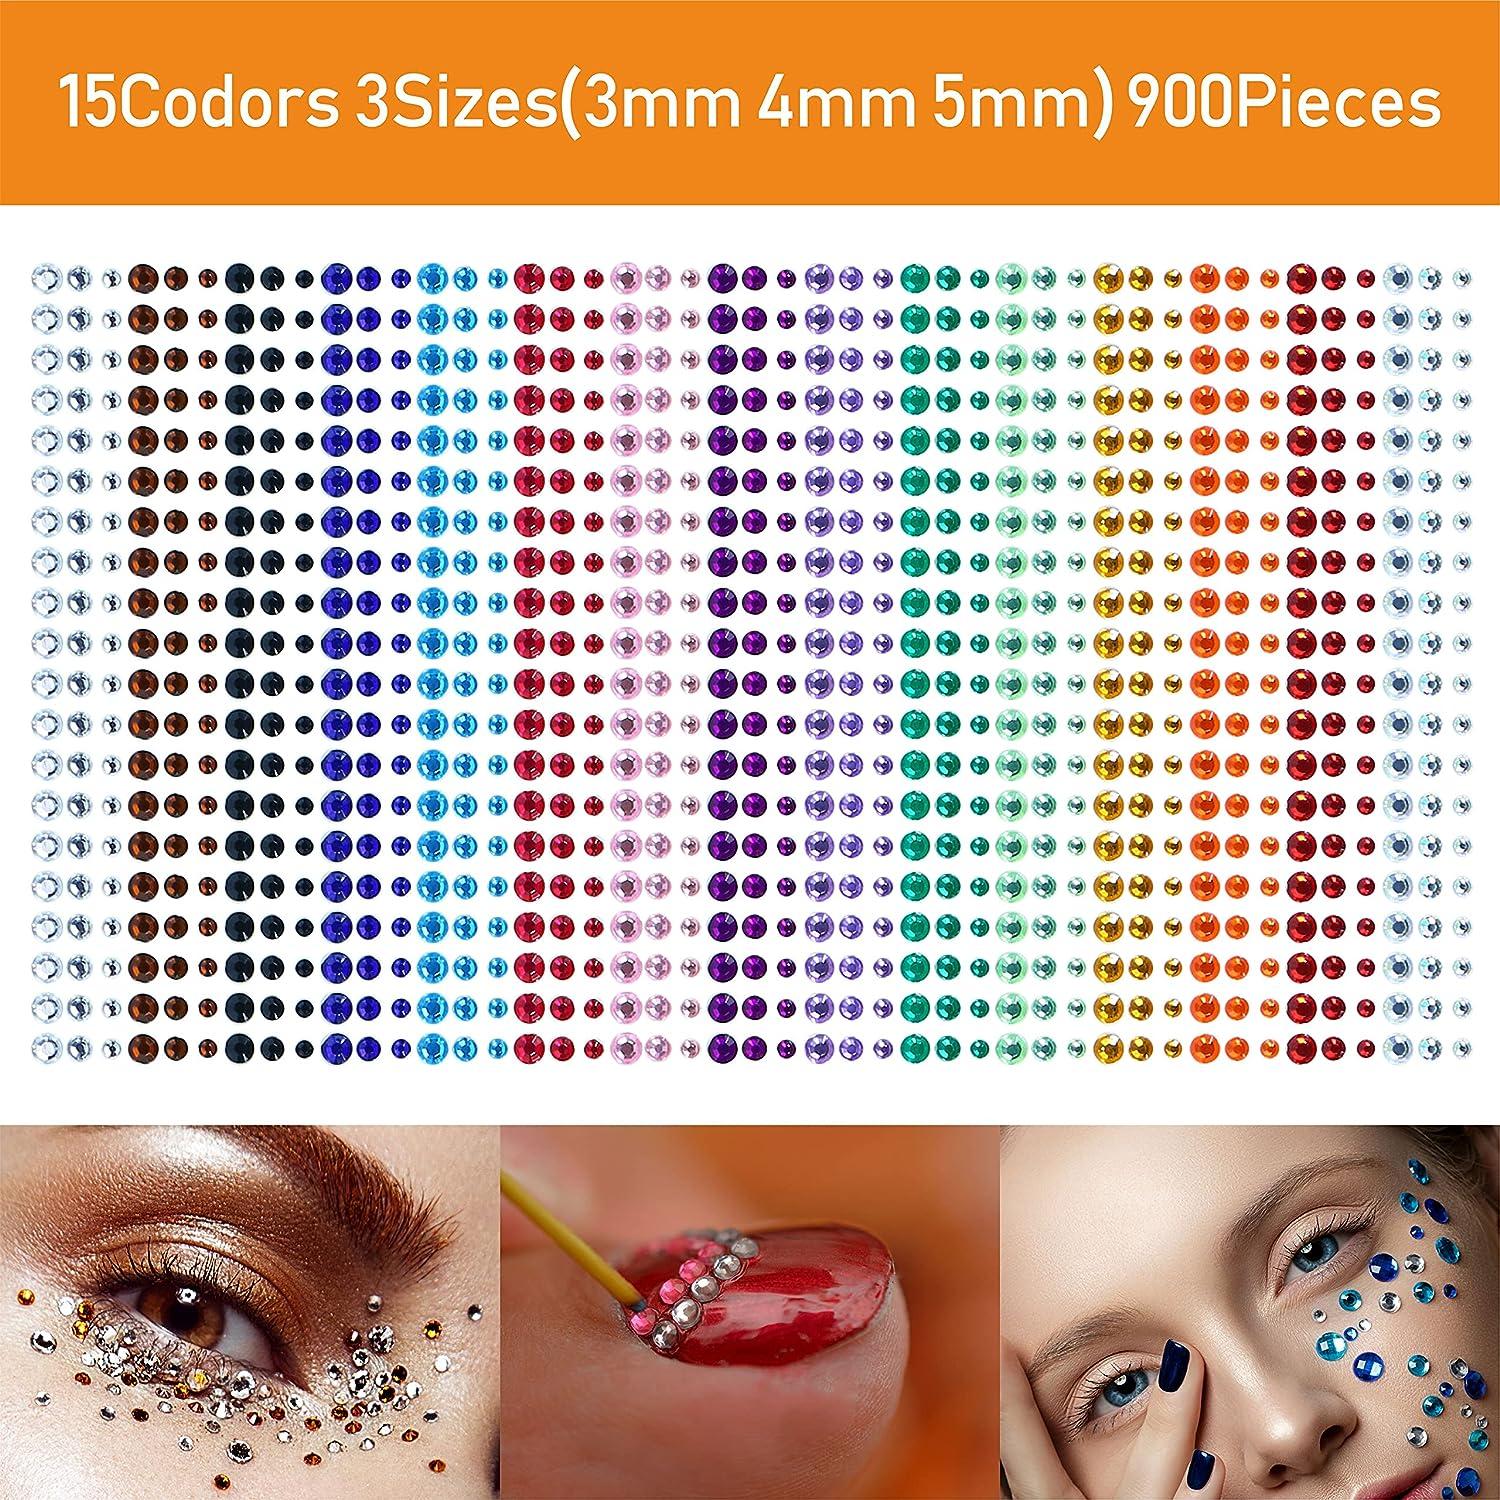 Face Gems 6 Sets Face Jewels Self-Adhesive Rhinestones Stickers And 1 Set  15 Colors 900pcs Face Gems For Makeup Mermaid Fairy Music Rave Festival  Accessories For Women Men Or Kids